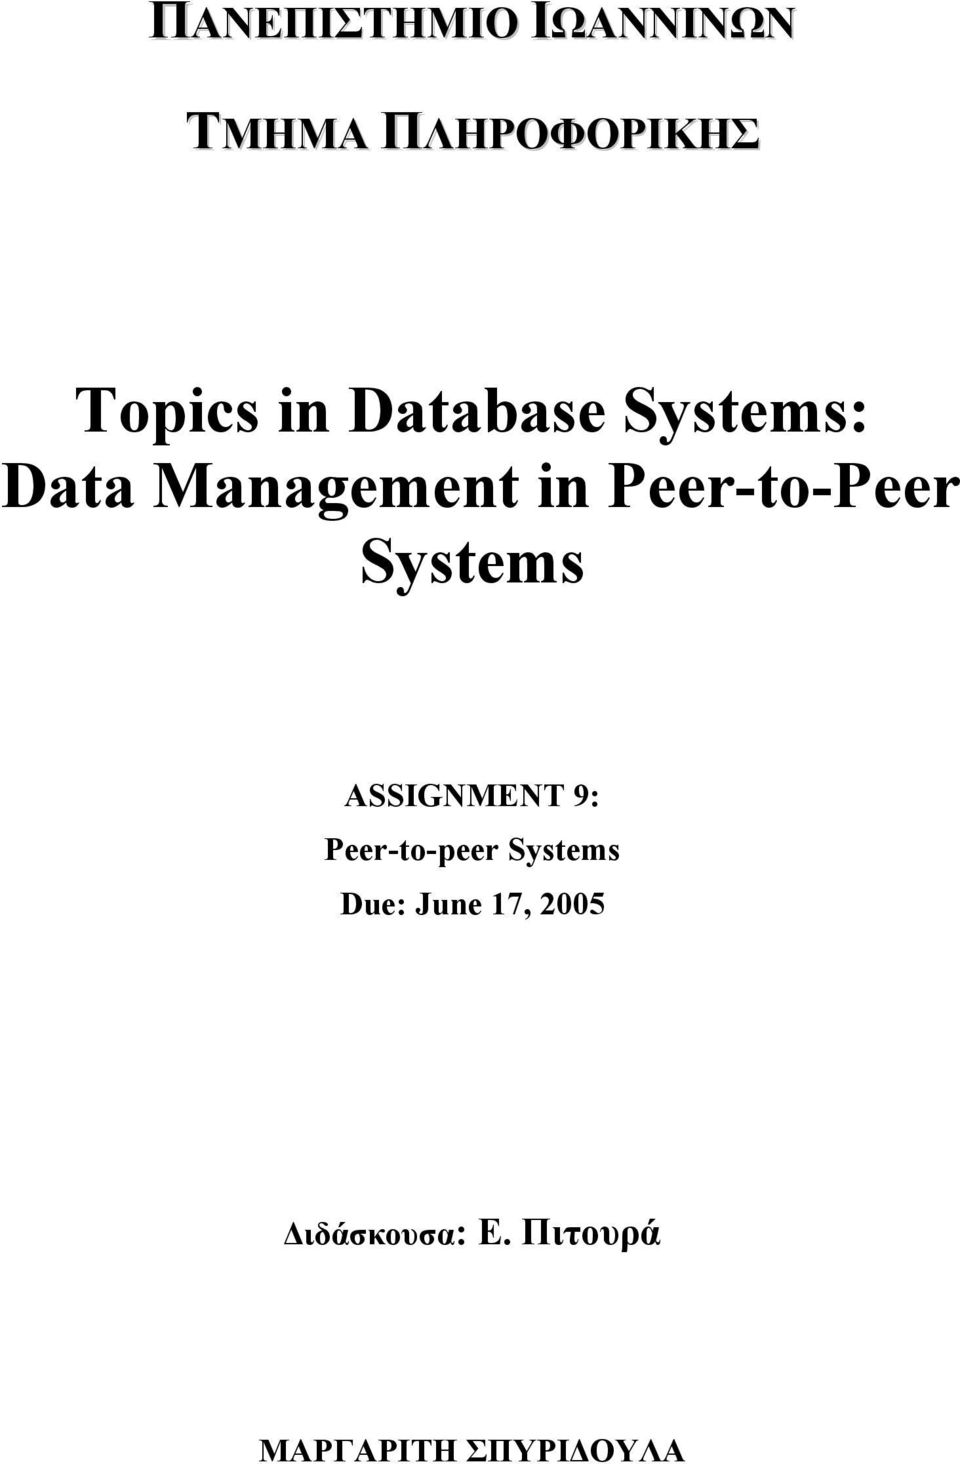 Systems ASSIGNMENT 9: Peer-to-peer Systems Due: